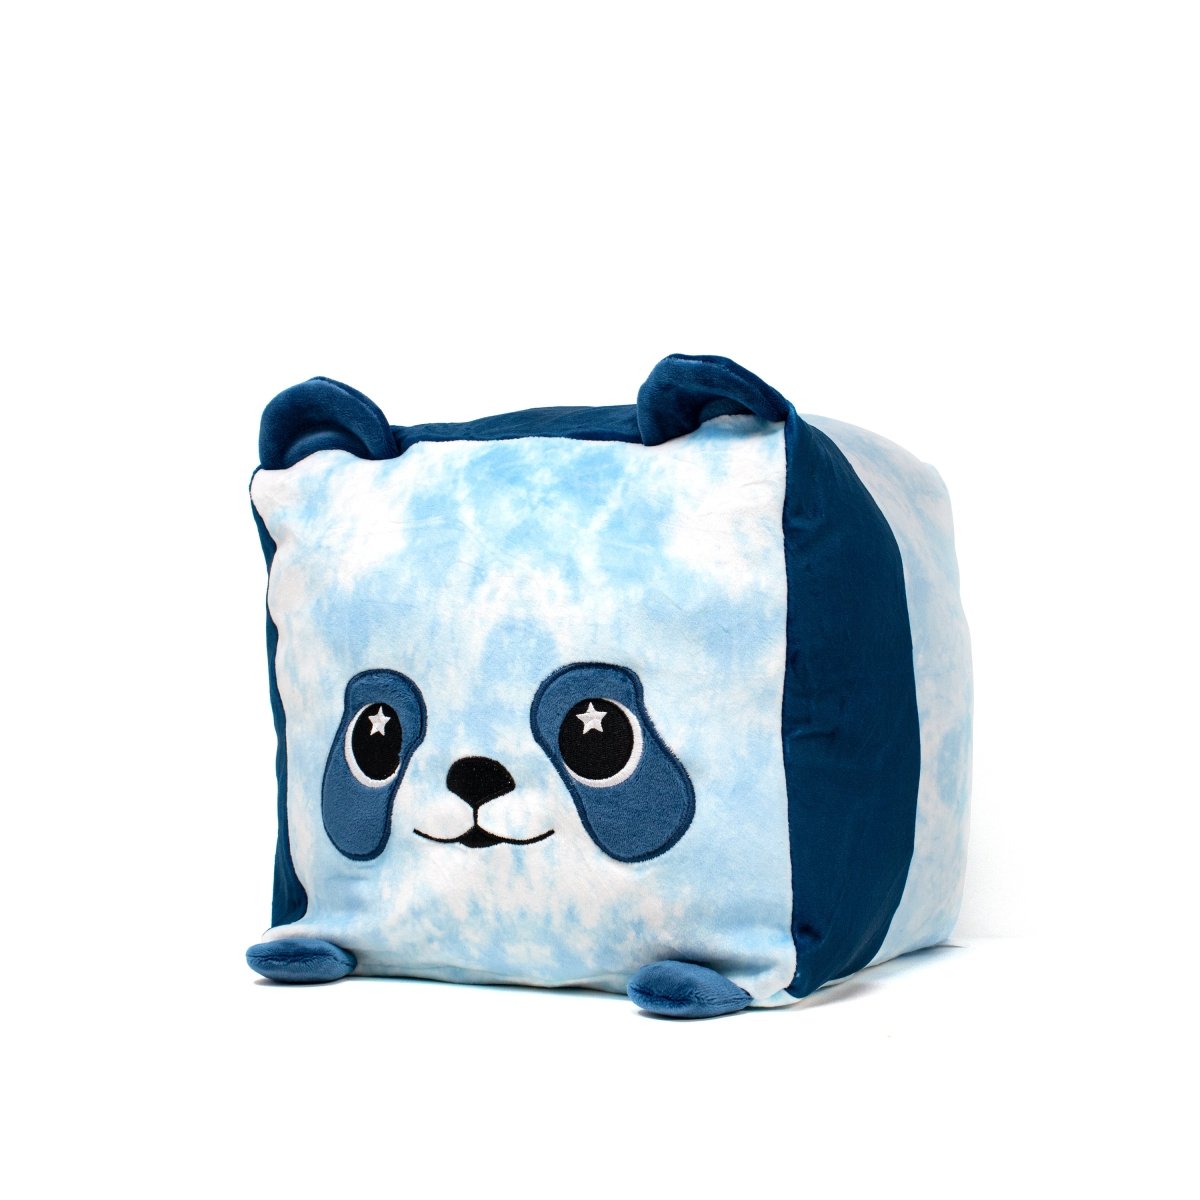 Tonya the Panda plush toy with soothing blue hues and round eyes from Moosh-Moosh SQUARED² Collection.